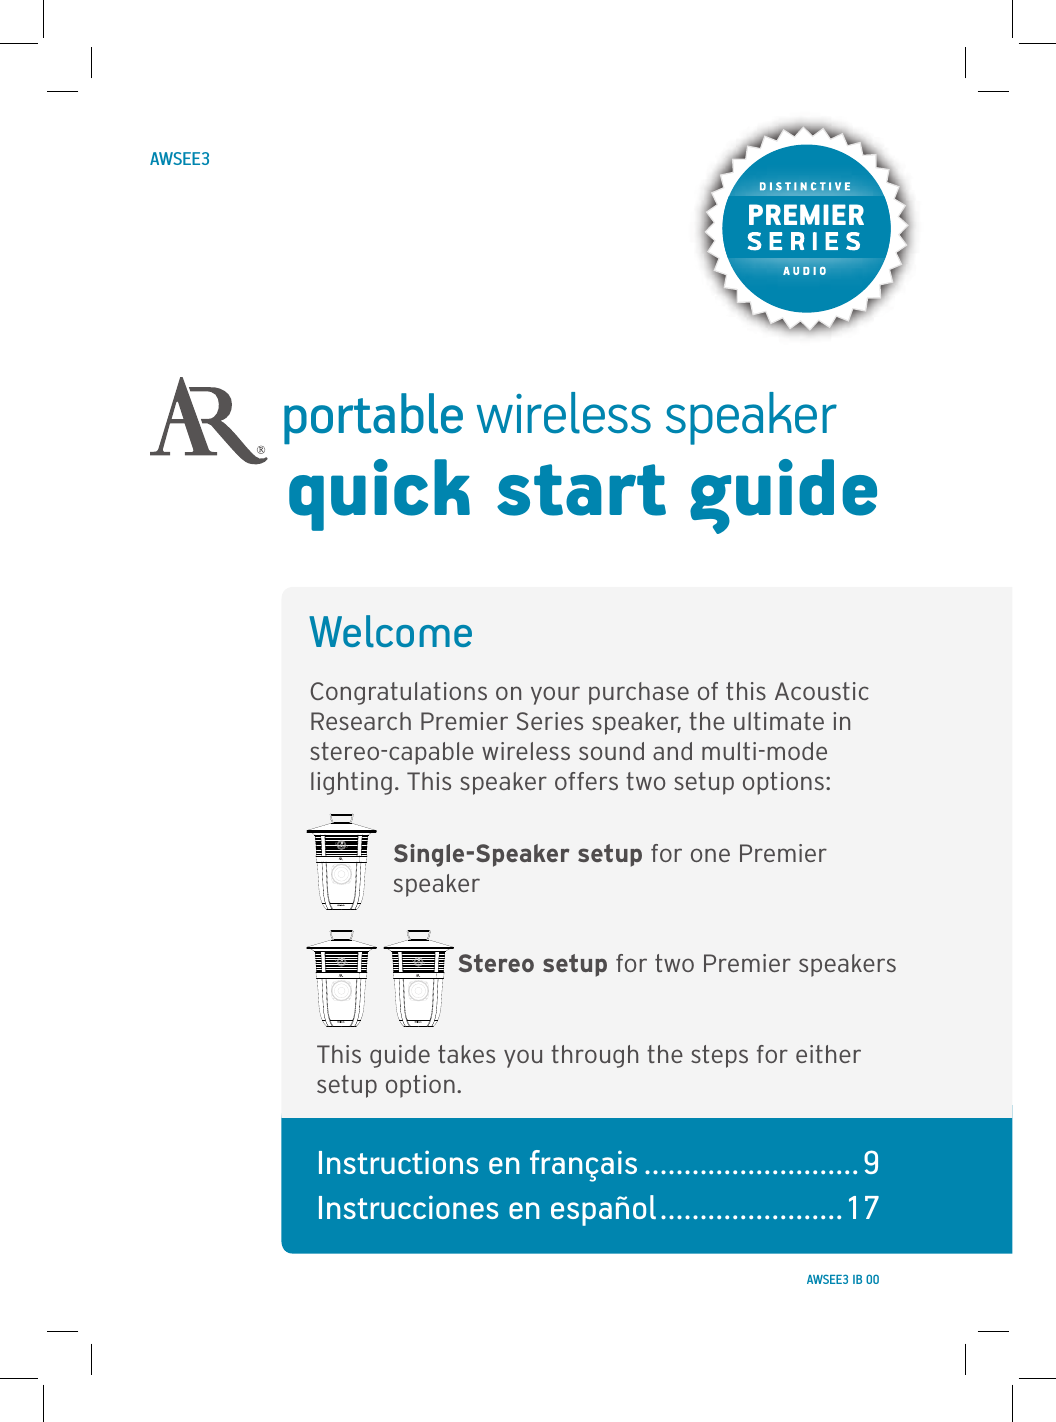 portable wireless speakerquick start guideWelcomeCongratulations on your purchase of this Acoustic Research Premier Series speaker, the ultimate in stereo-capable wireless sound and multi-mode lighting. This speaker offers two setup options:Single-Speaker setup for one Premier speakerStereo setup for two Premier speakersThis guide takes you through the steps for either setup option.AWSEE3Instructions en français ...........................9 Instrucciones en español .......................17PREMIERAWSEE3 IB 00